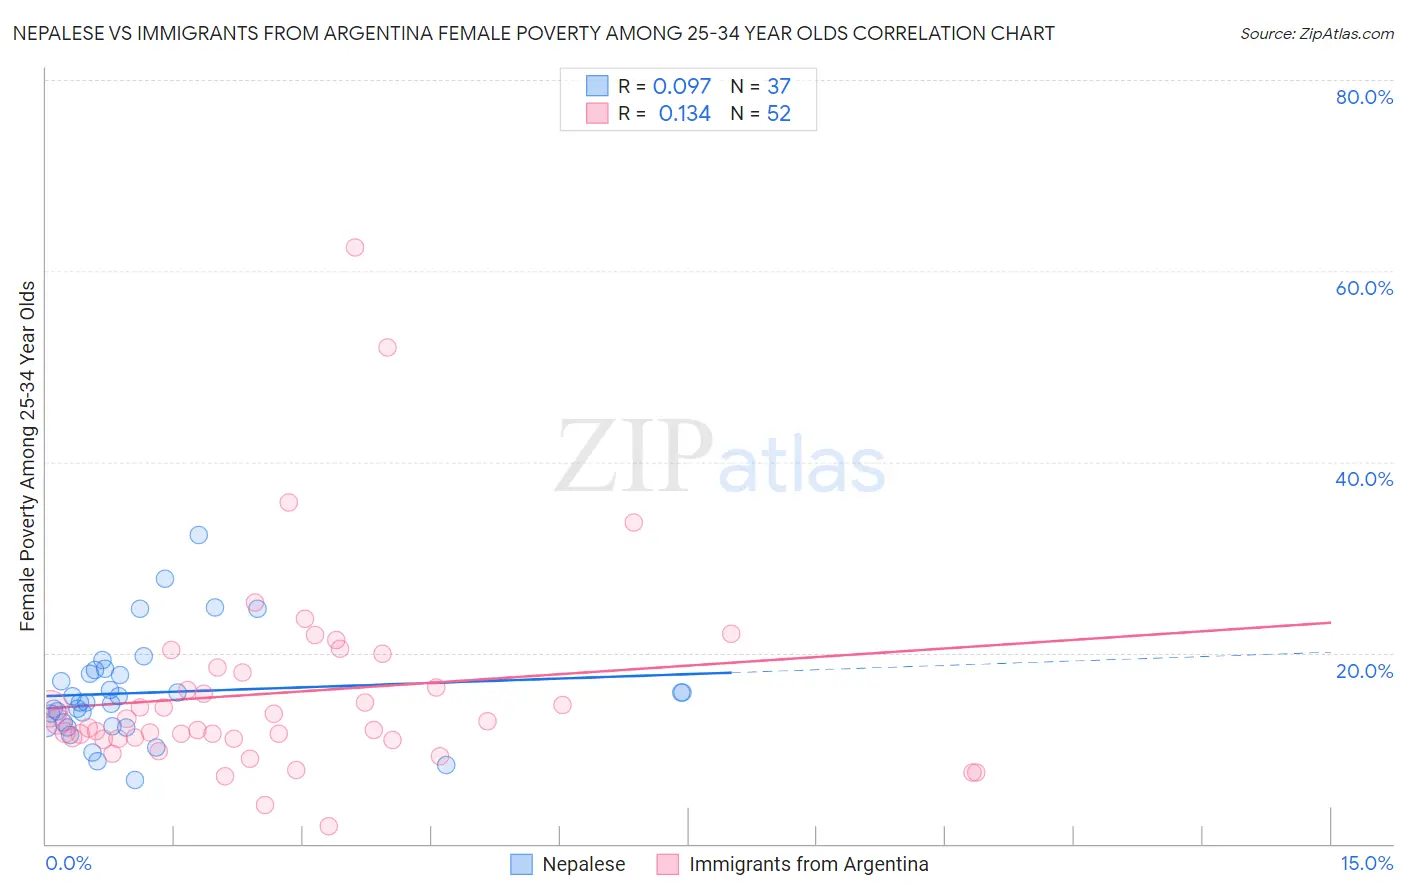 Nepalese vs Immigrants from Argentina Female Poverty Among 25-34 Year Olds